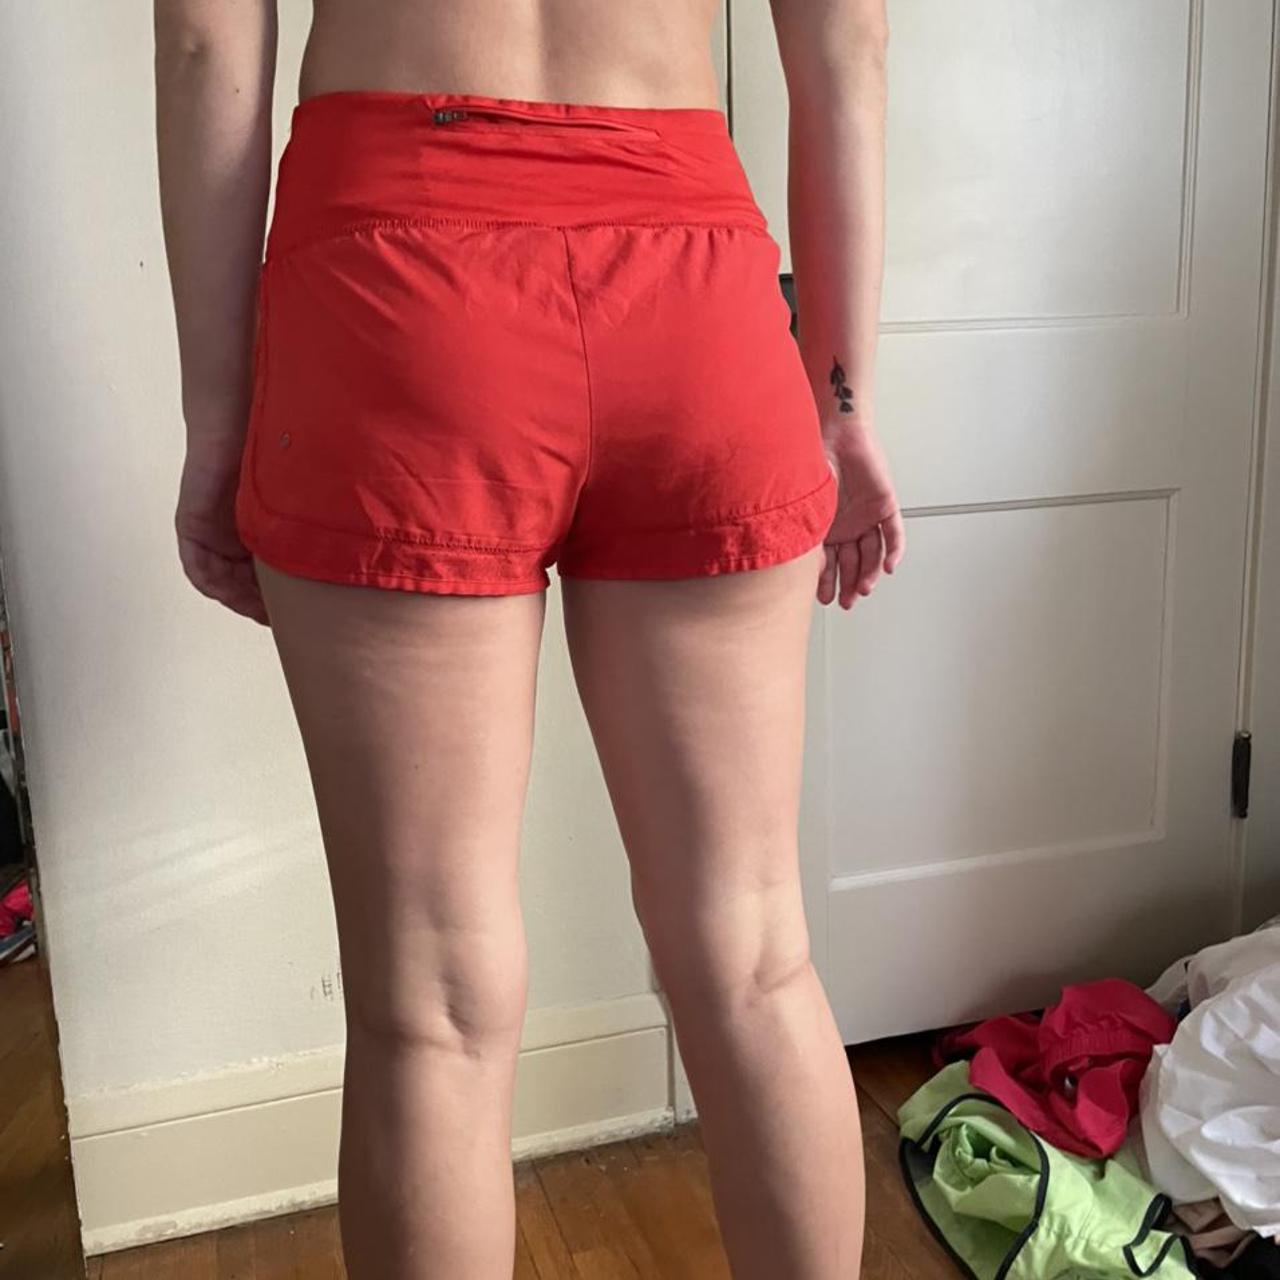 super cute athletic shorts! they have inside lining - Depop